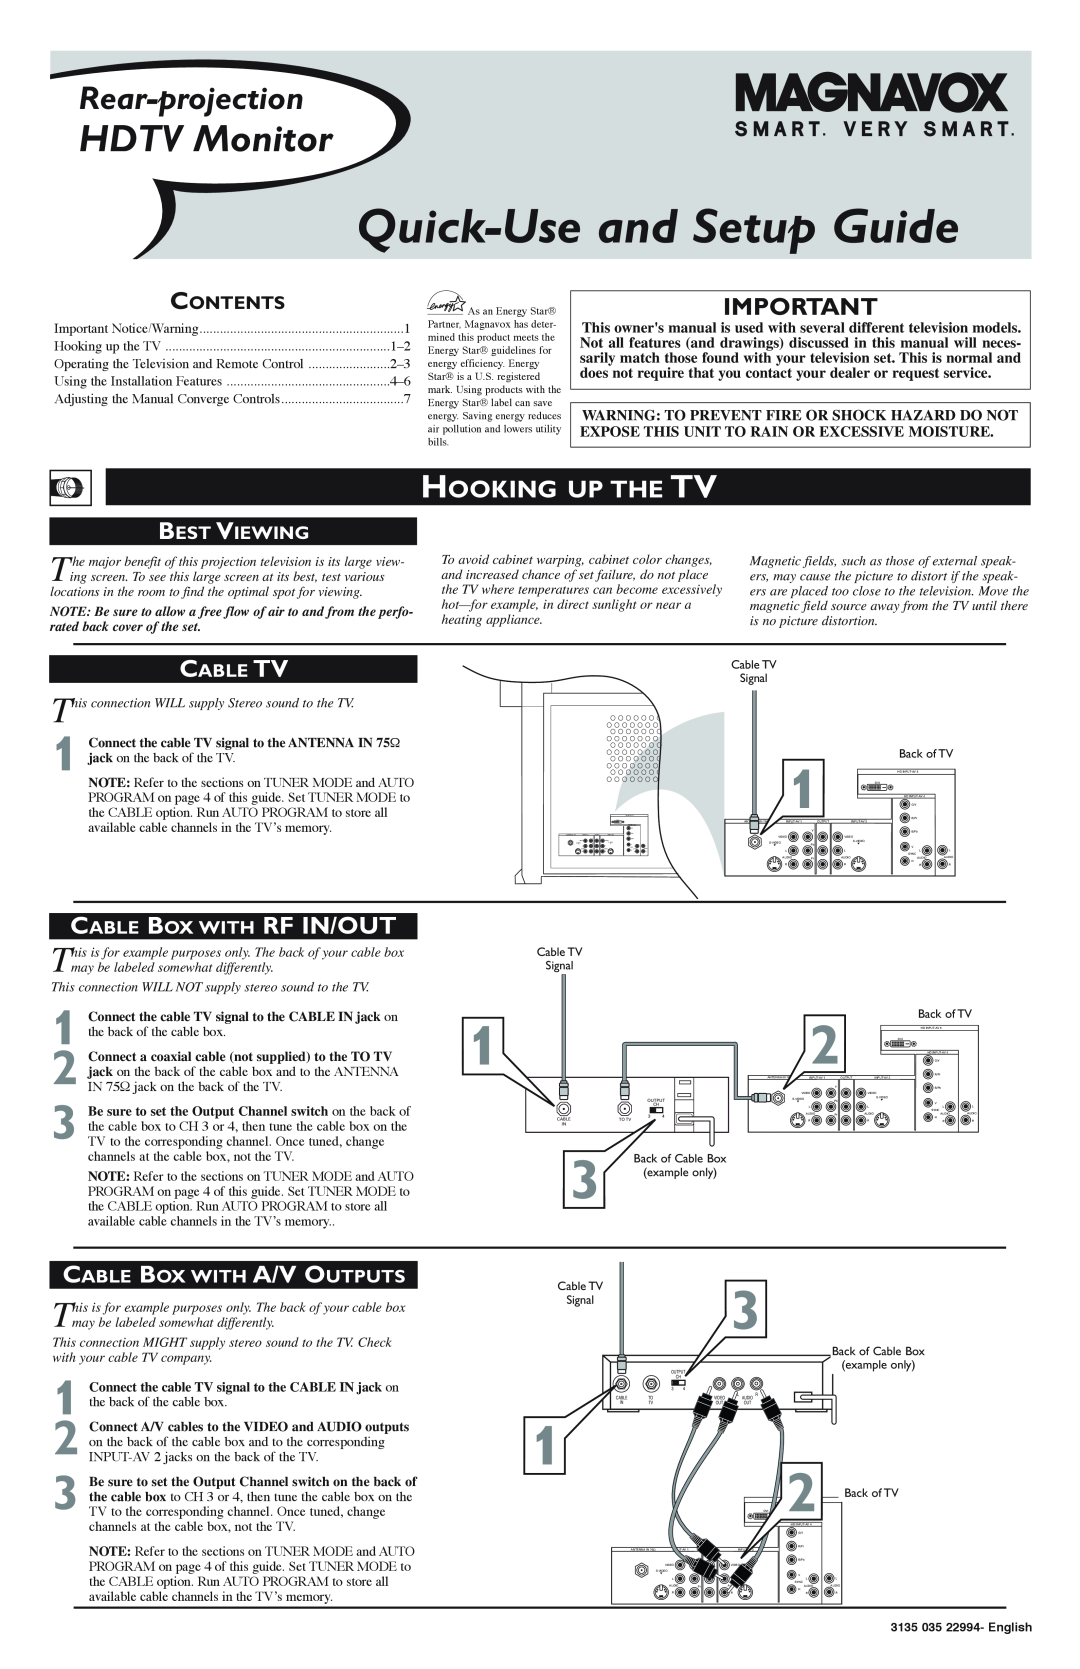 Magnavox Rear-projection HDTV Monitor setup guide Hooking Up The Tv, Best Viewing, Cable Tv, Cable Box With Rf In/Out 